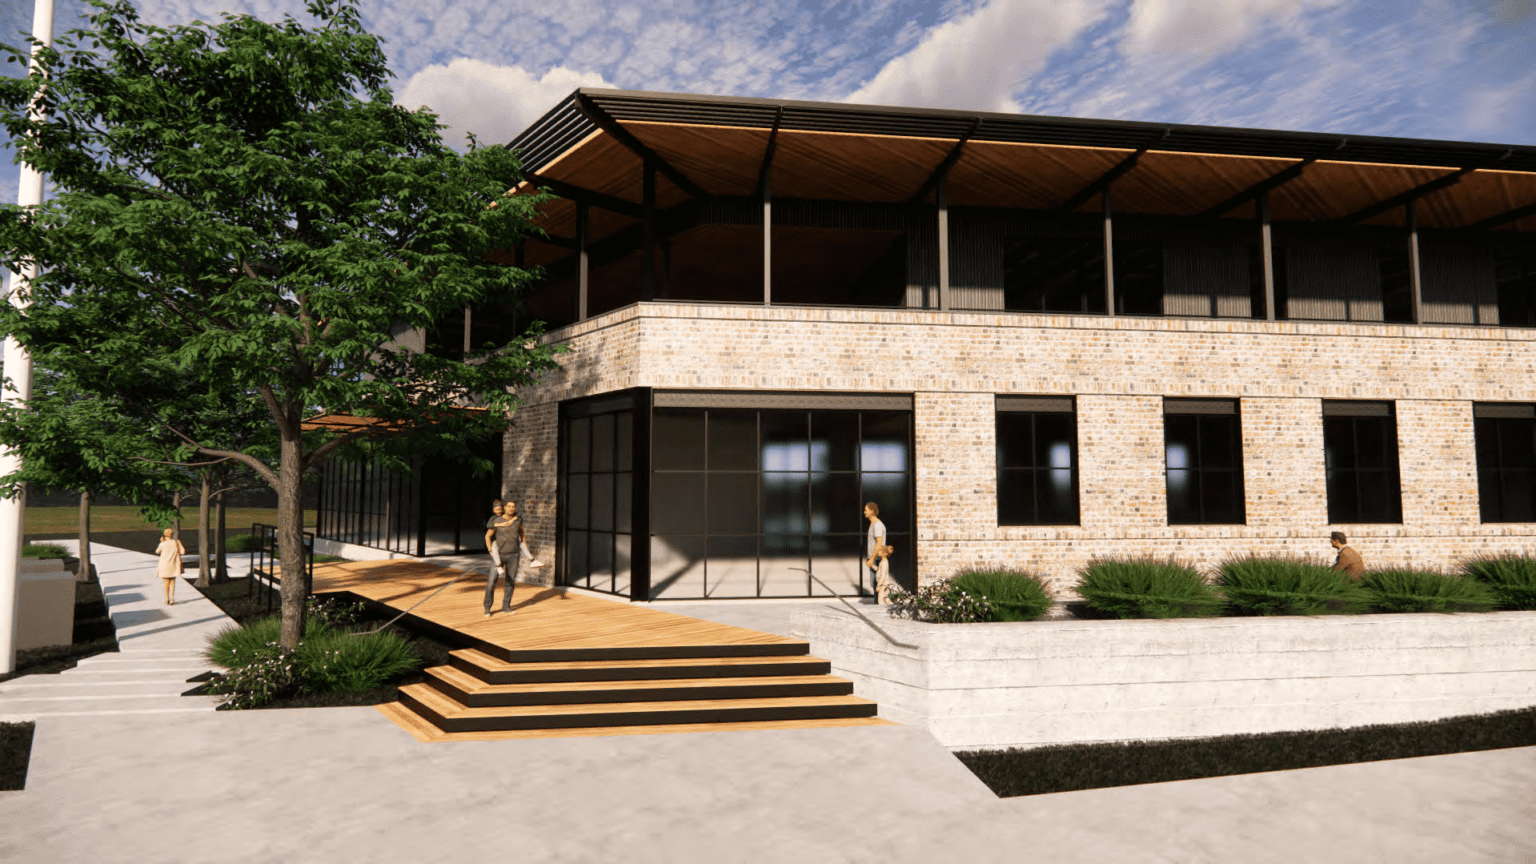 Mixed Use Development in New Braunfels   |   Rendering courtesy of TADA